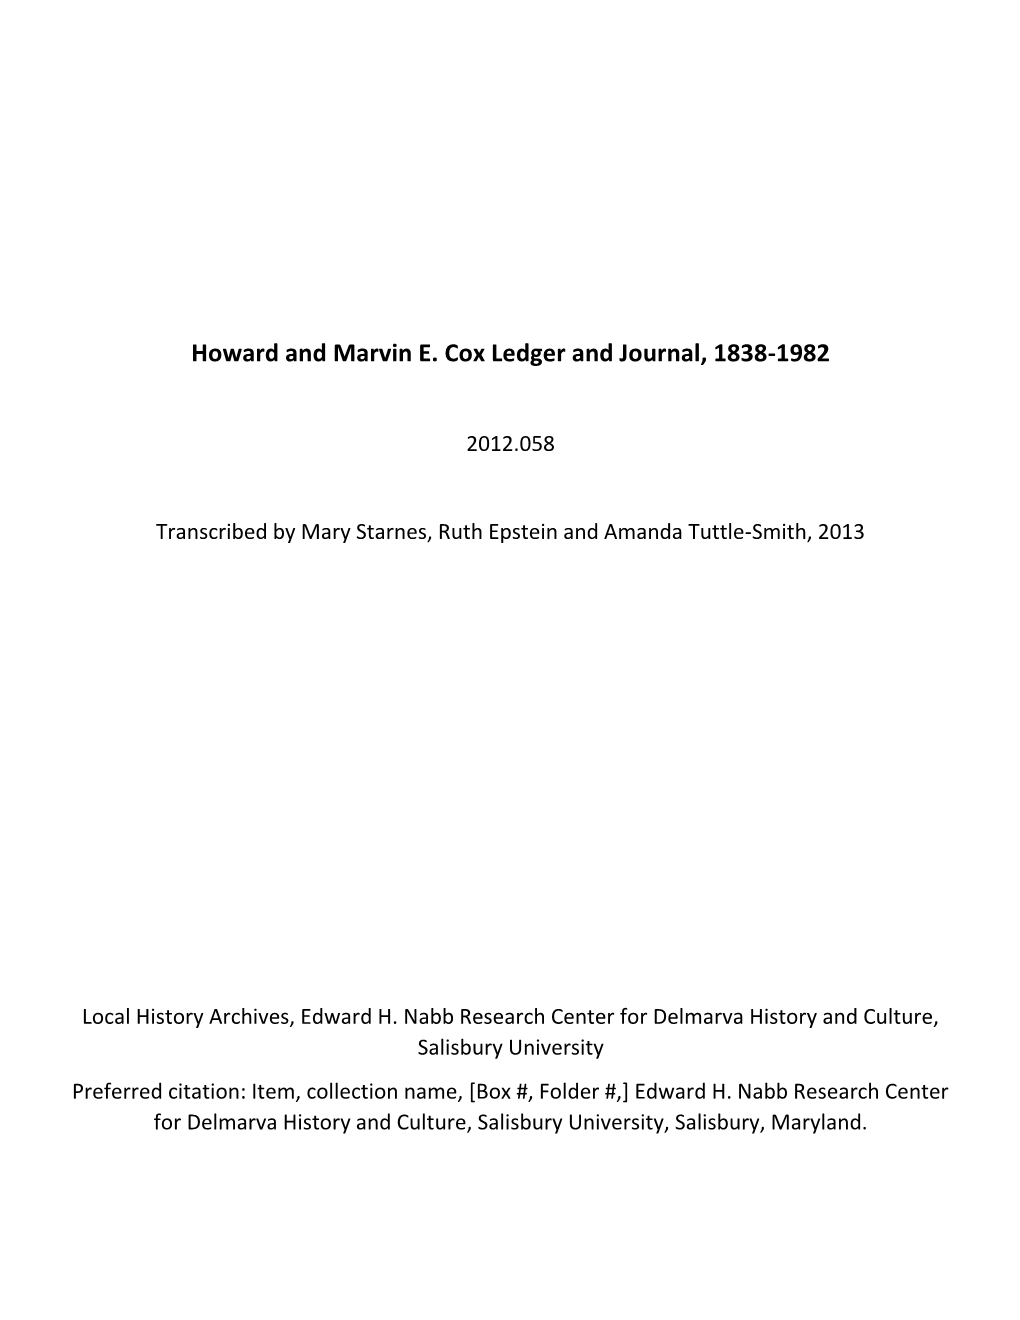 Howard and Marvin E. Cox Ledger and Journal, 1838-1982